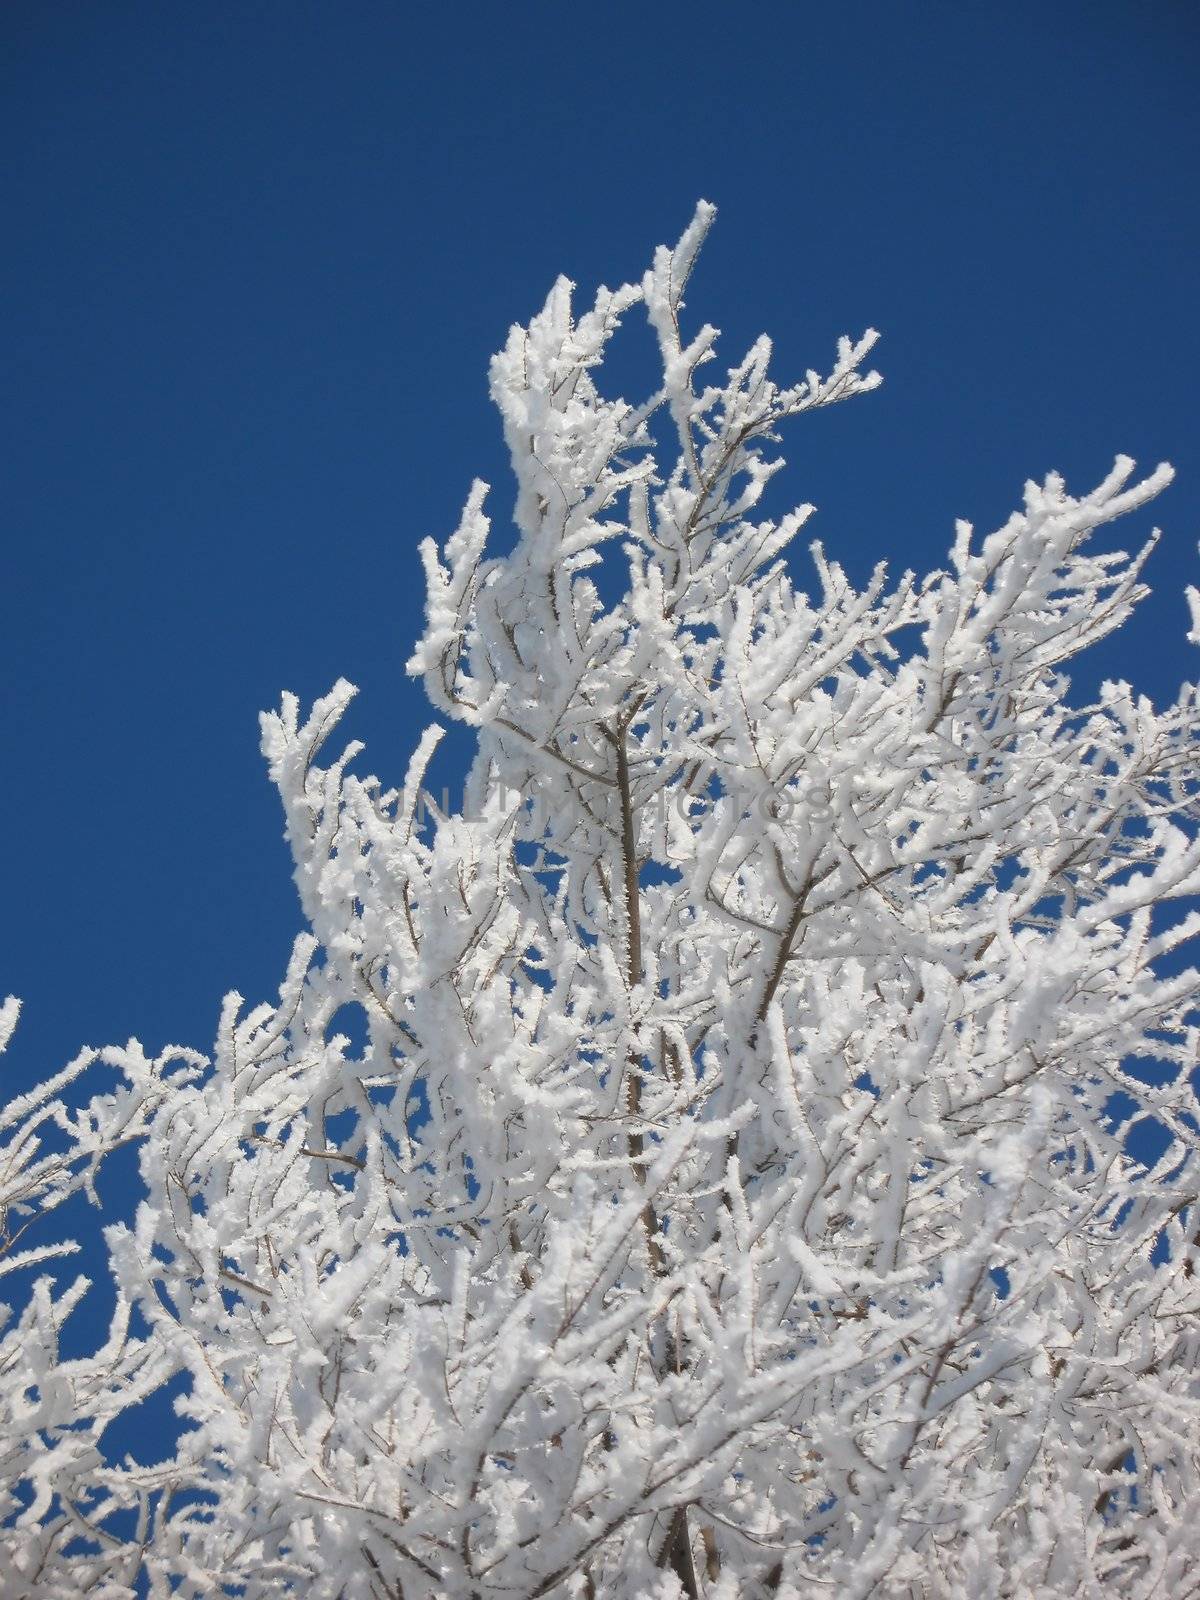 Tree branches in white fluffy hoarfrost against the dark blue sky